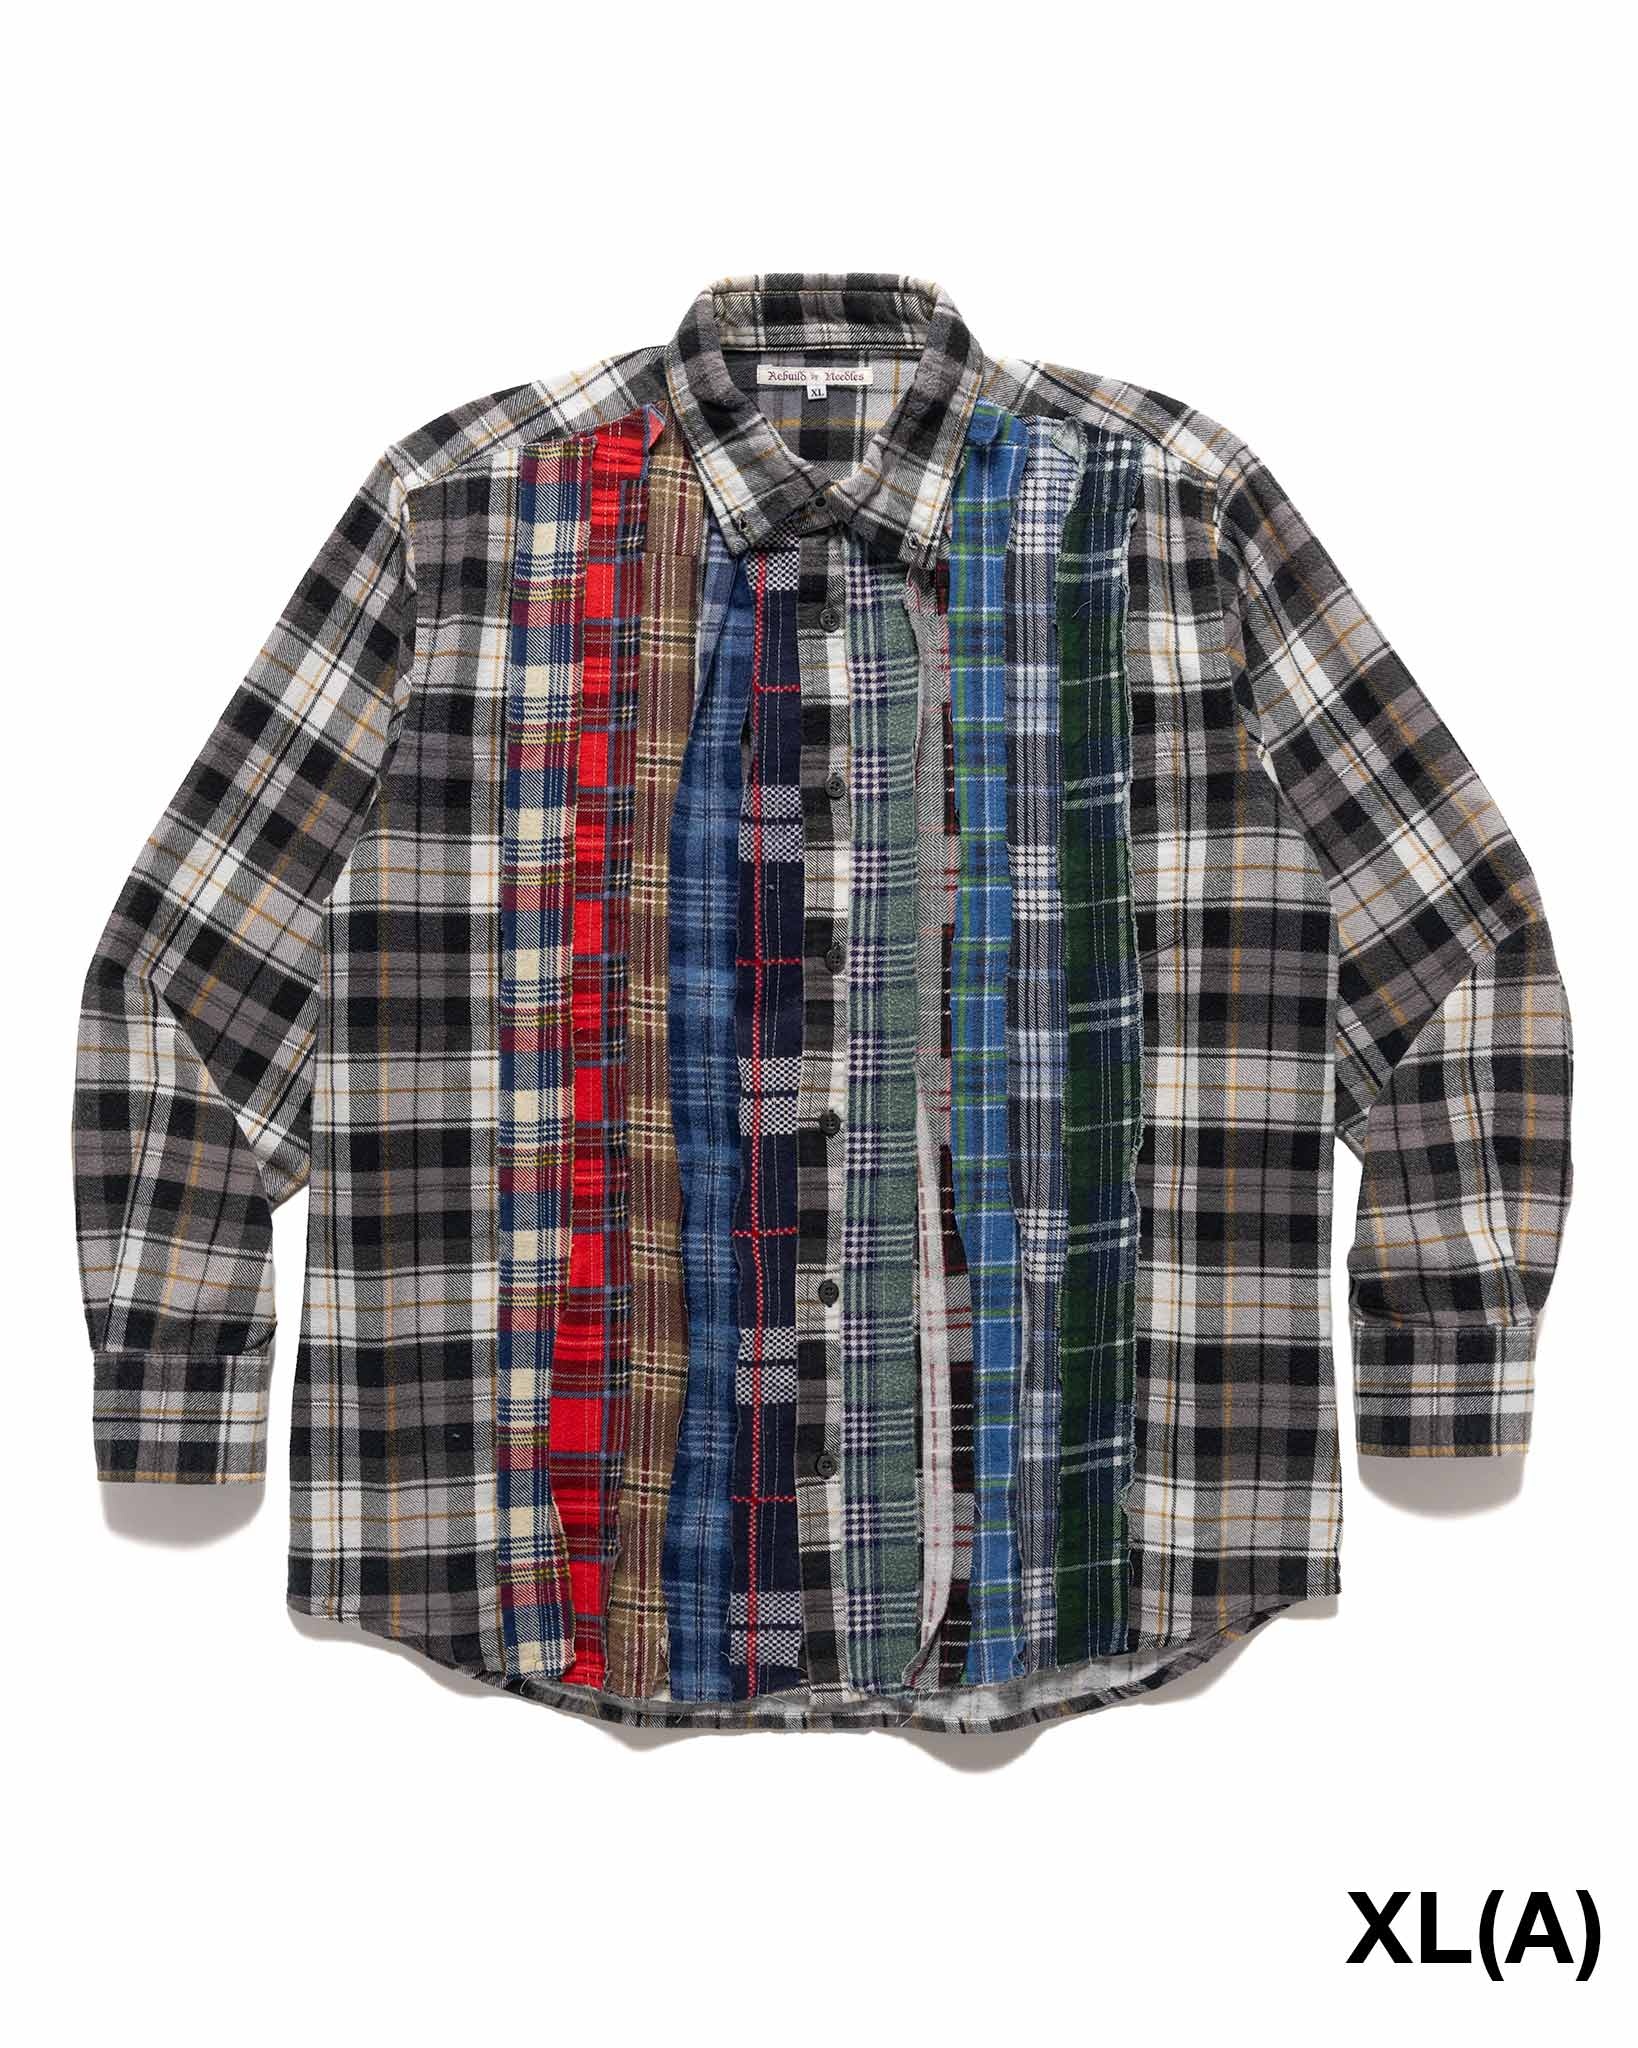 Rebuild by Needles Flannel Shirt -> Ribbon Shirt Assorted - 17